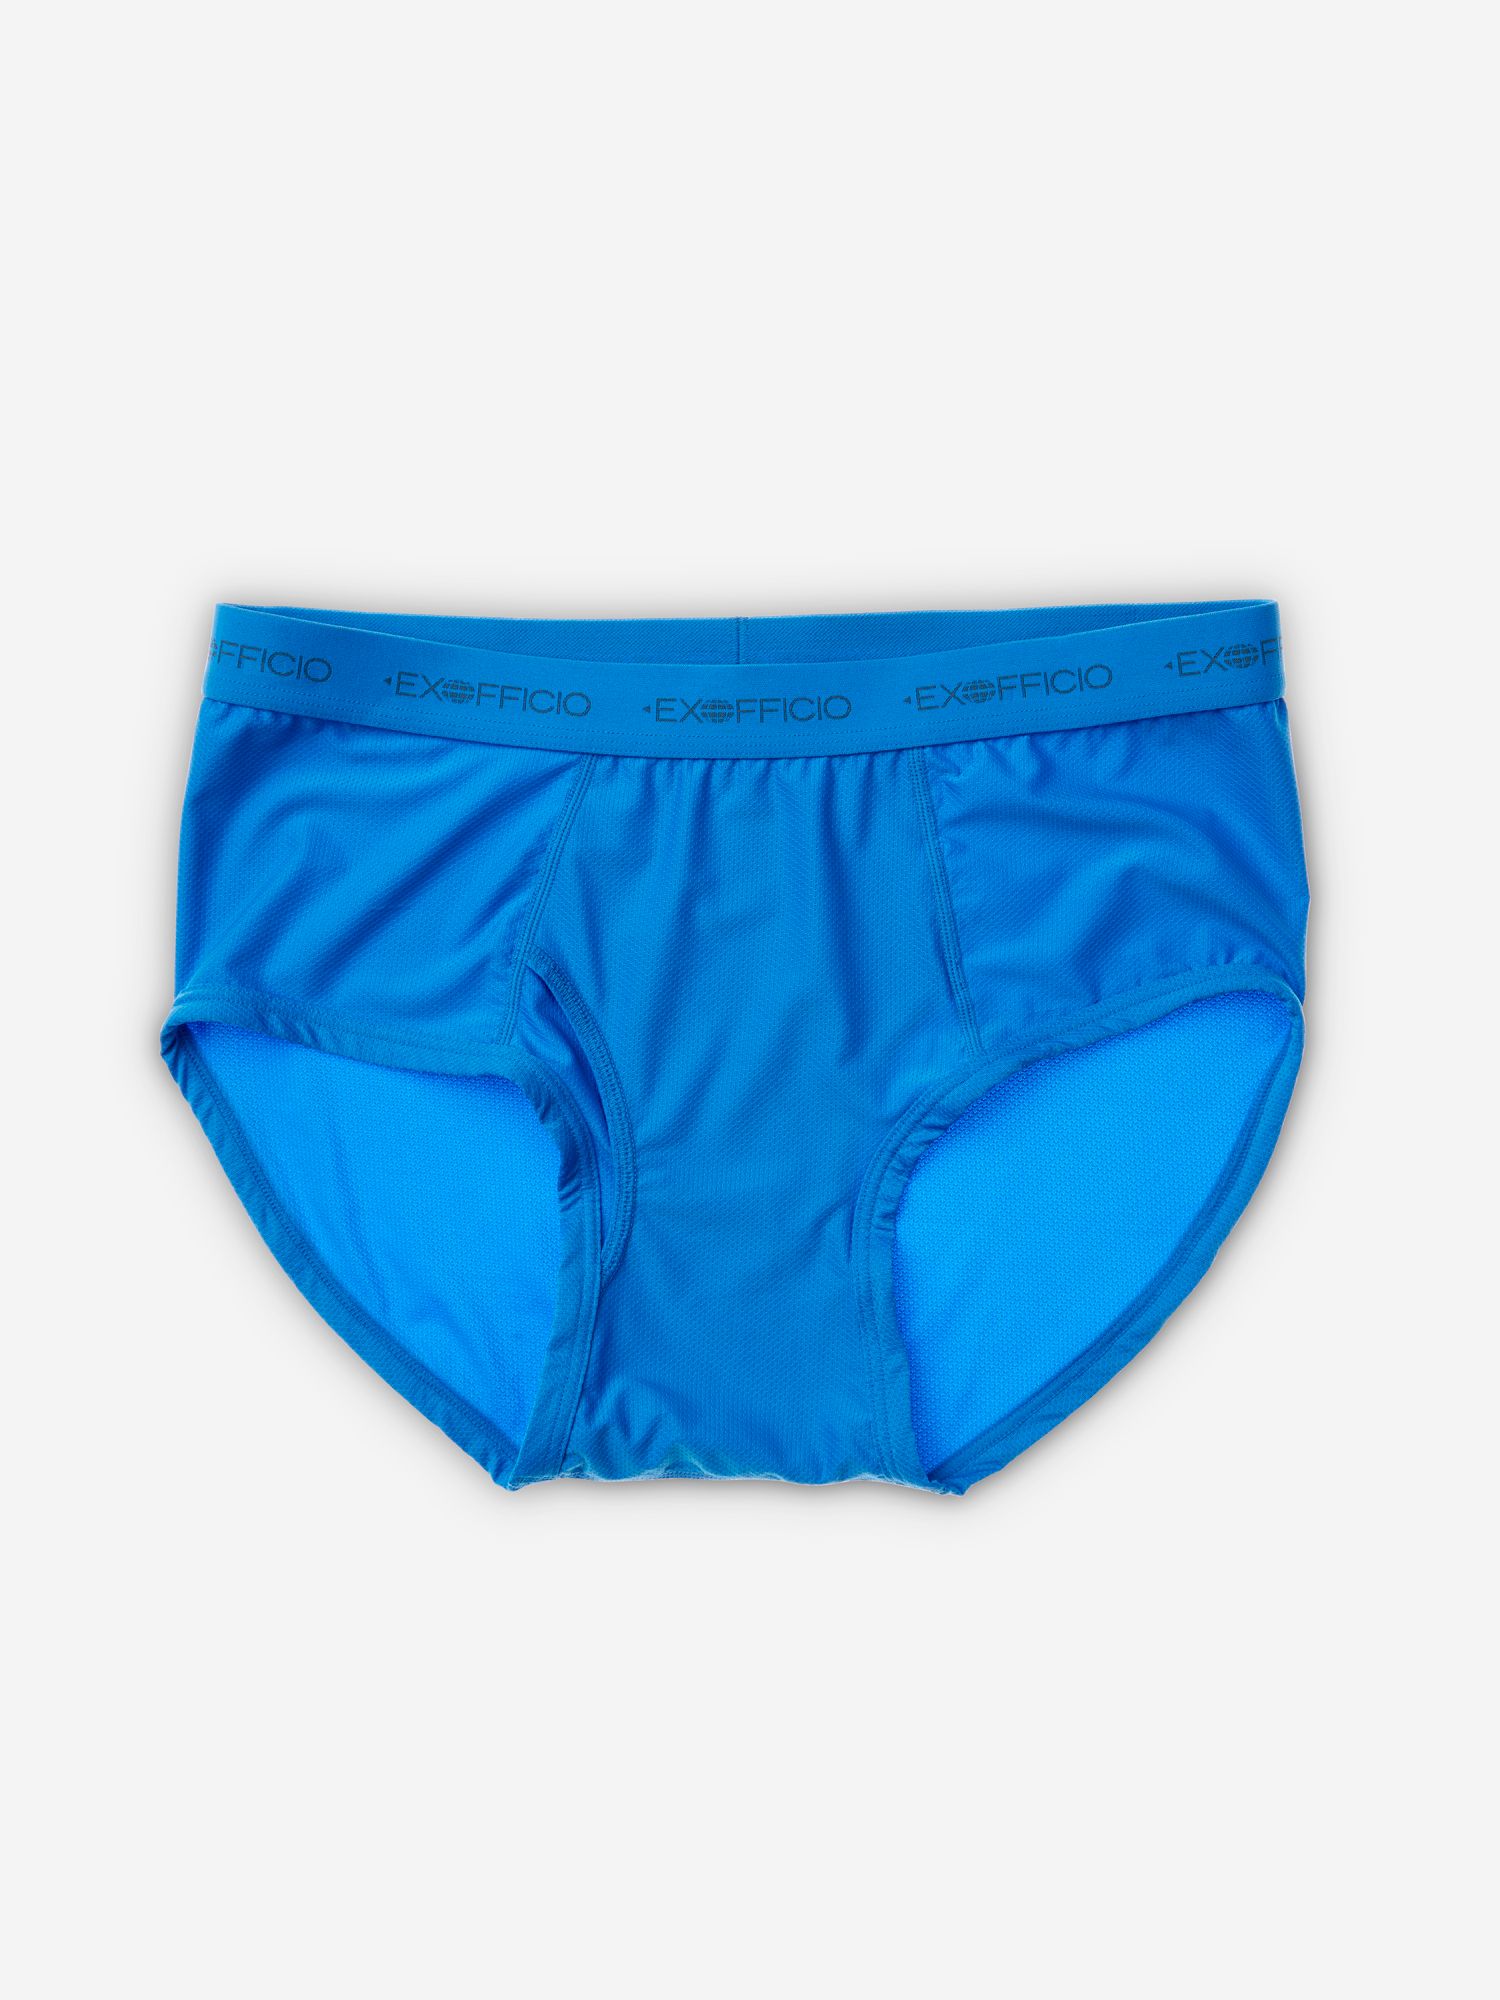 Men's Give-N-Go® 2.0 Brief